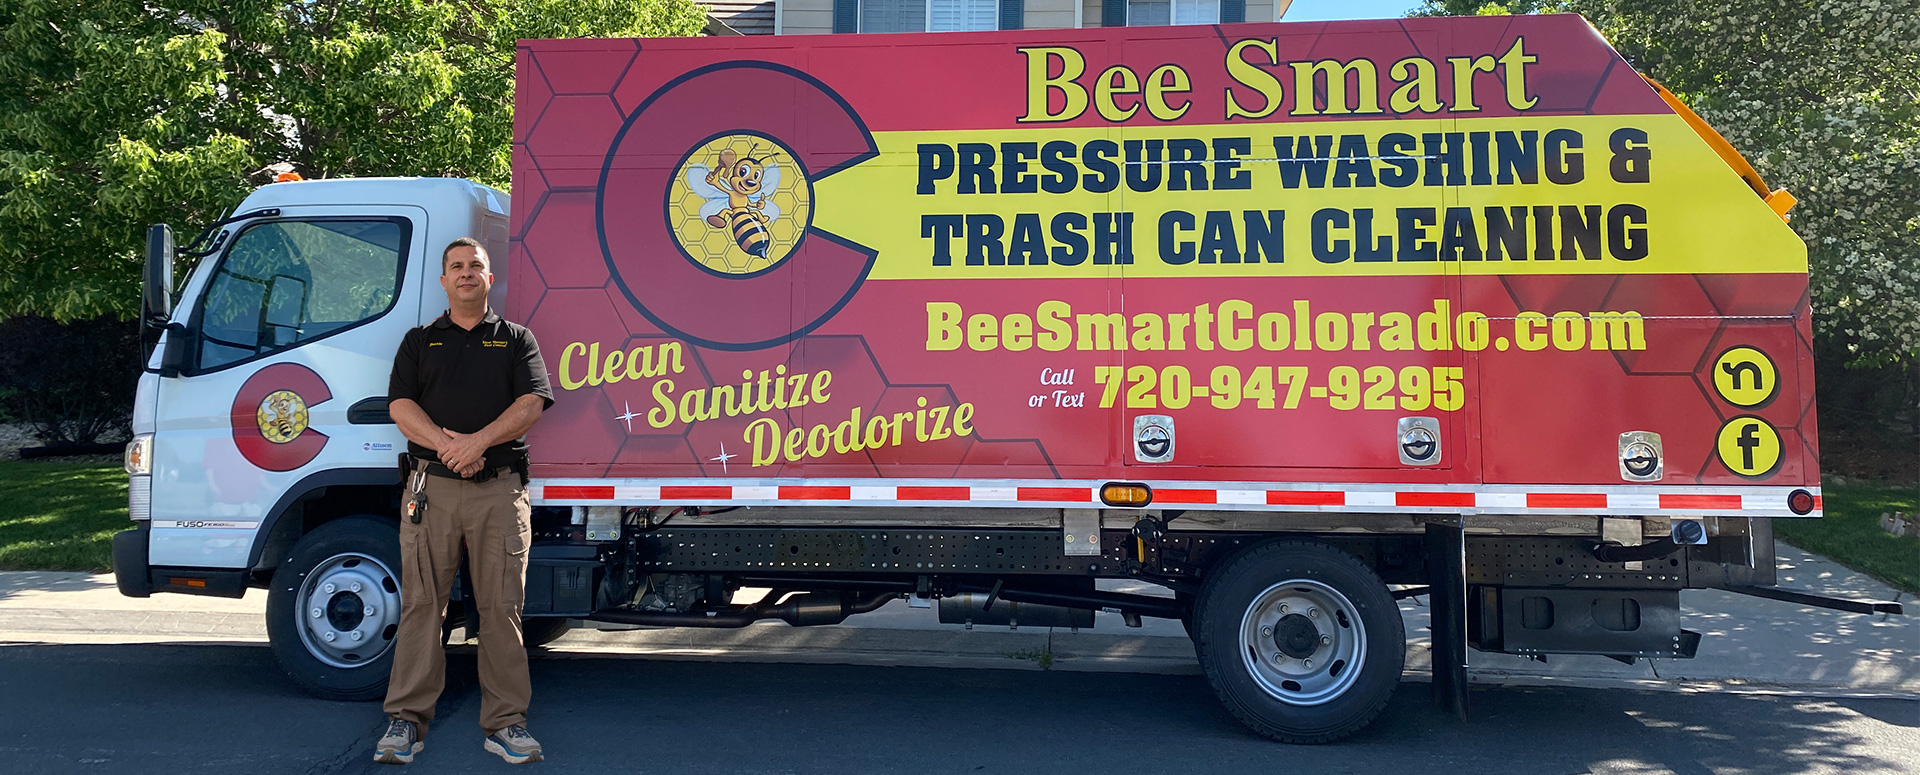 Justin In Front of Bee Smart Pressure Washing Truck